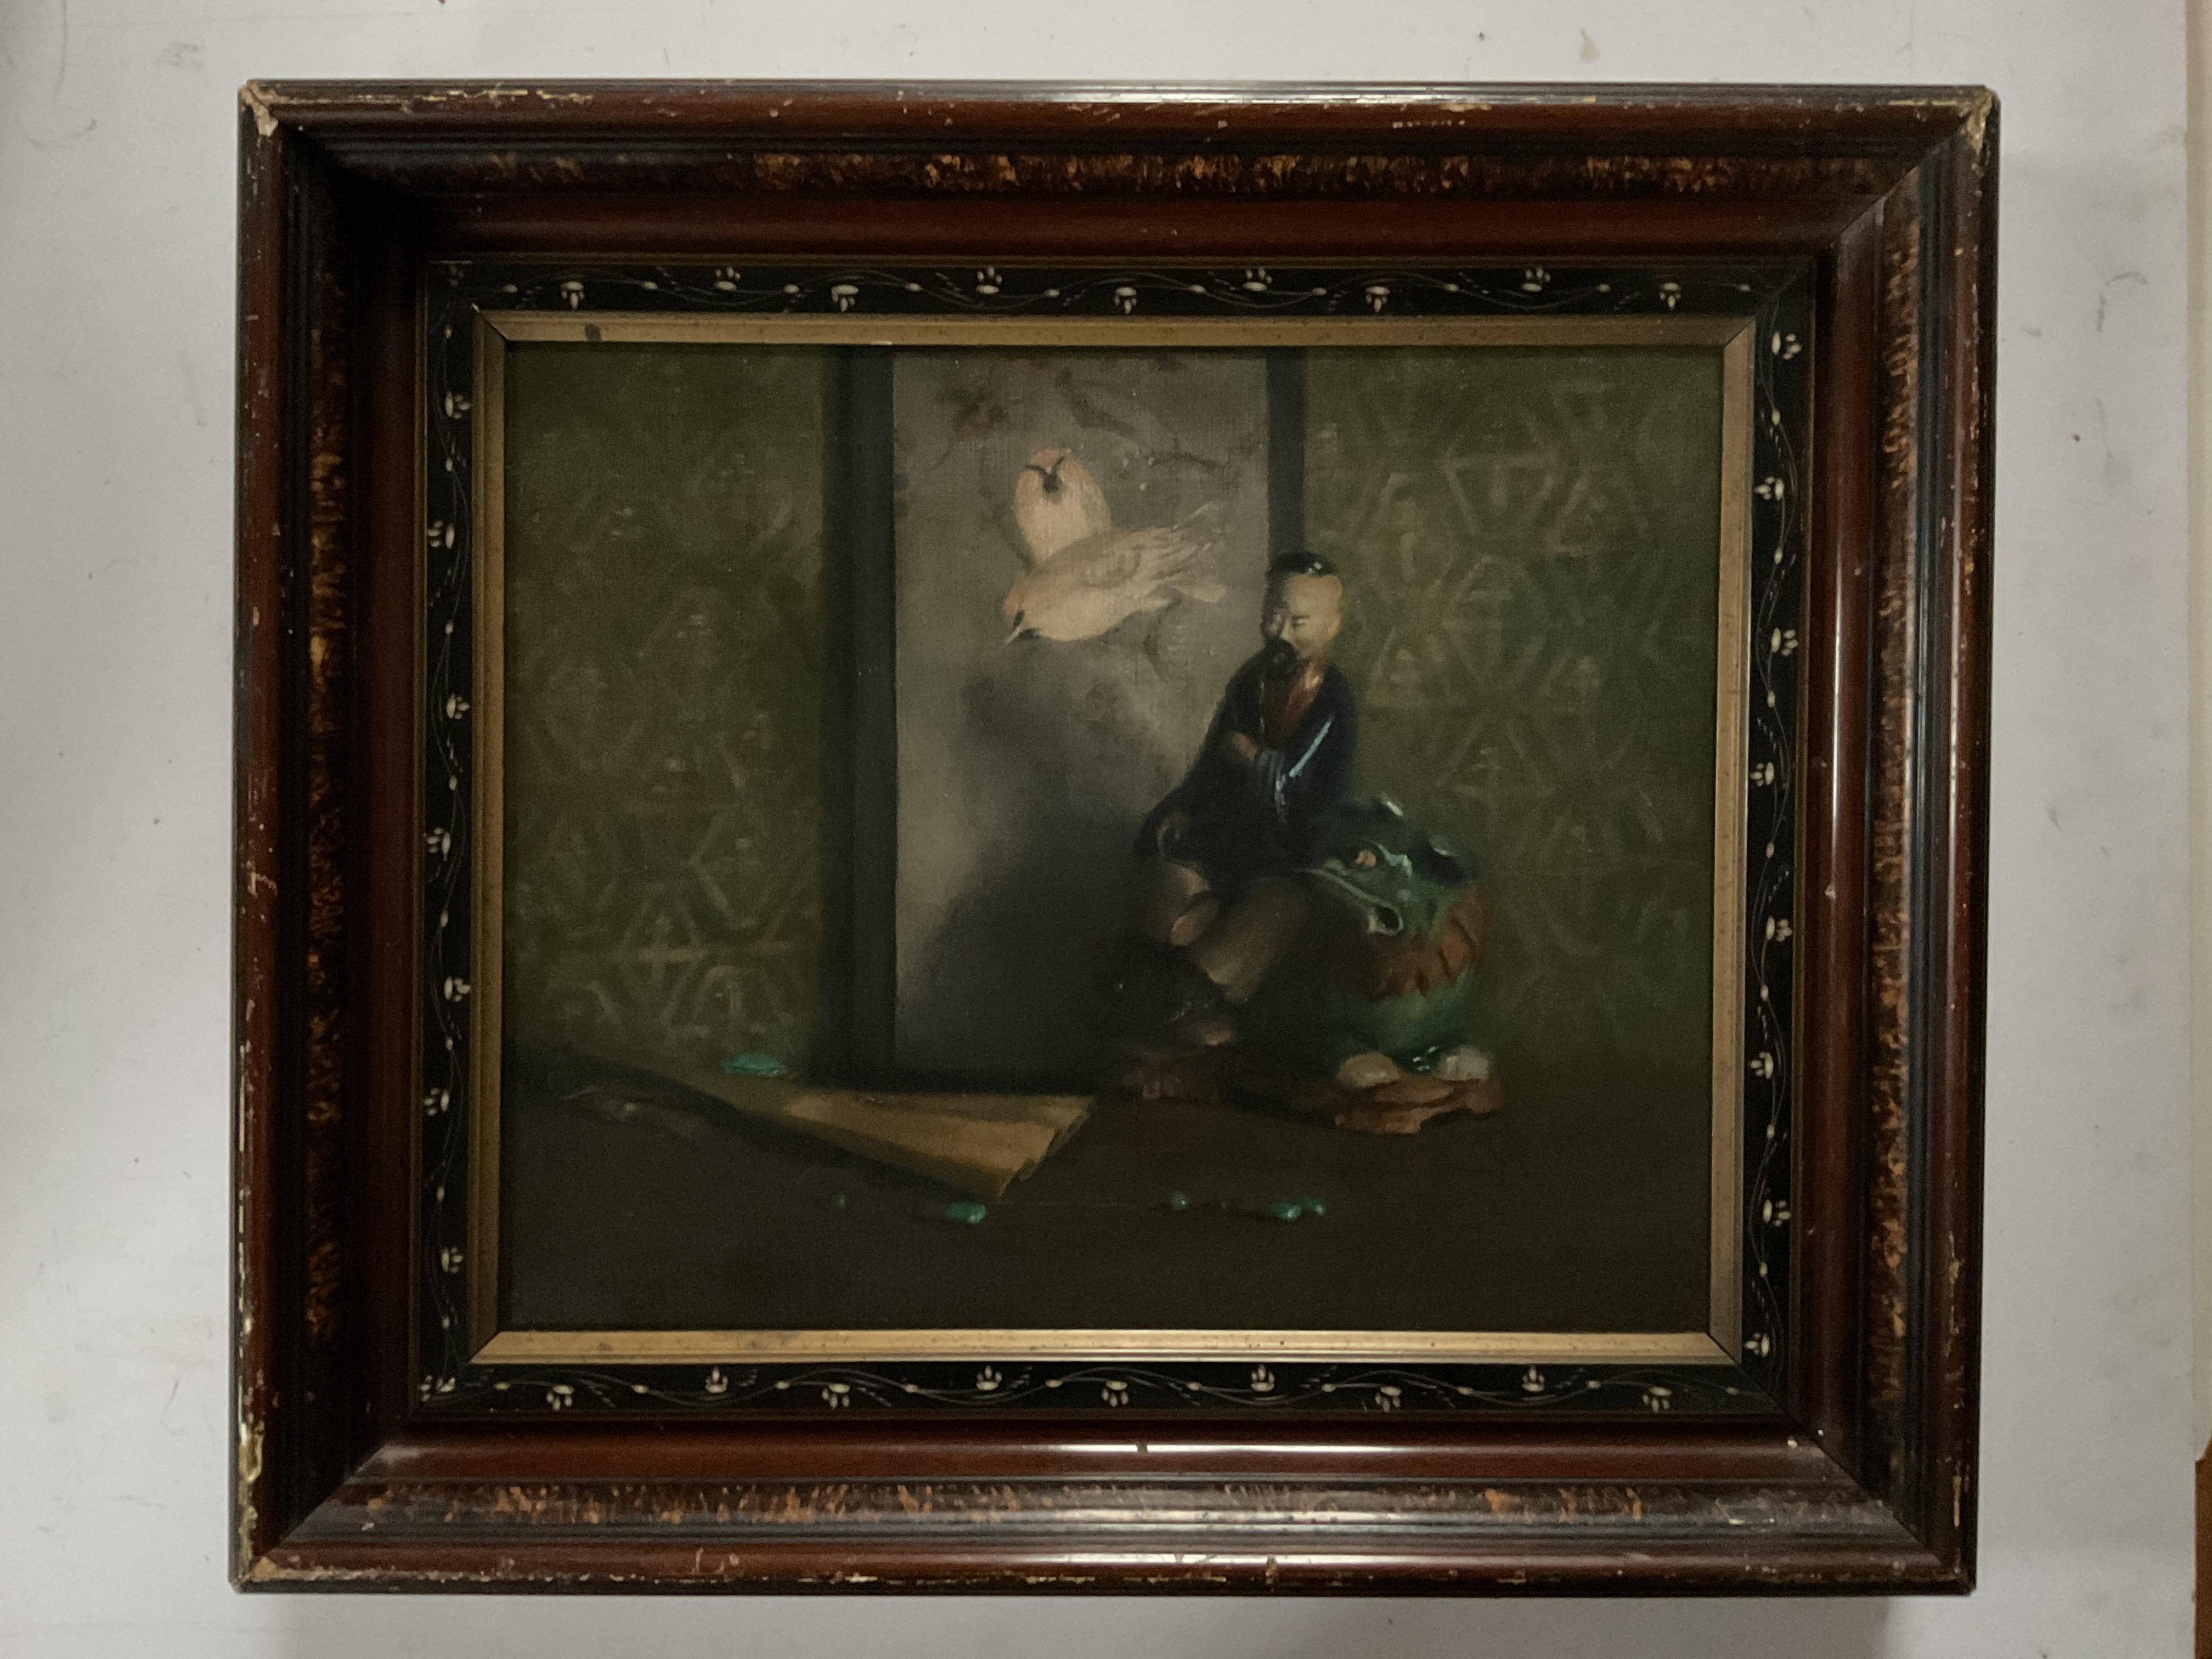 This is a spiritually inspired oil painting by noted American artist Caroline W. Pitkin. The Japanese themed setting is well composed with figures, a screened backdrop and a folded fan with a few beads included.  Although done in hushed tones, the